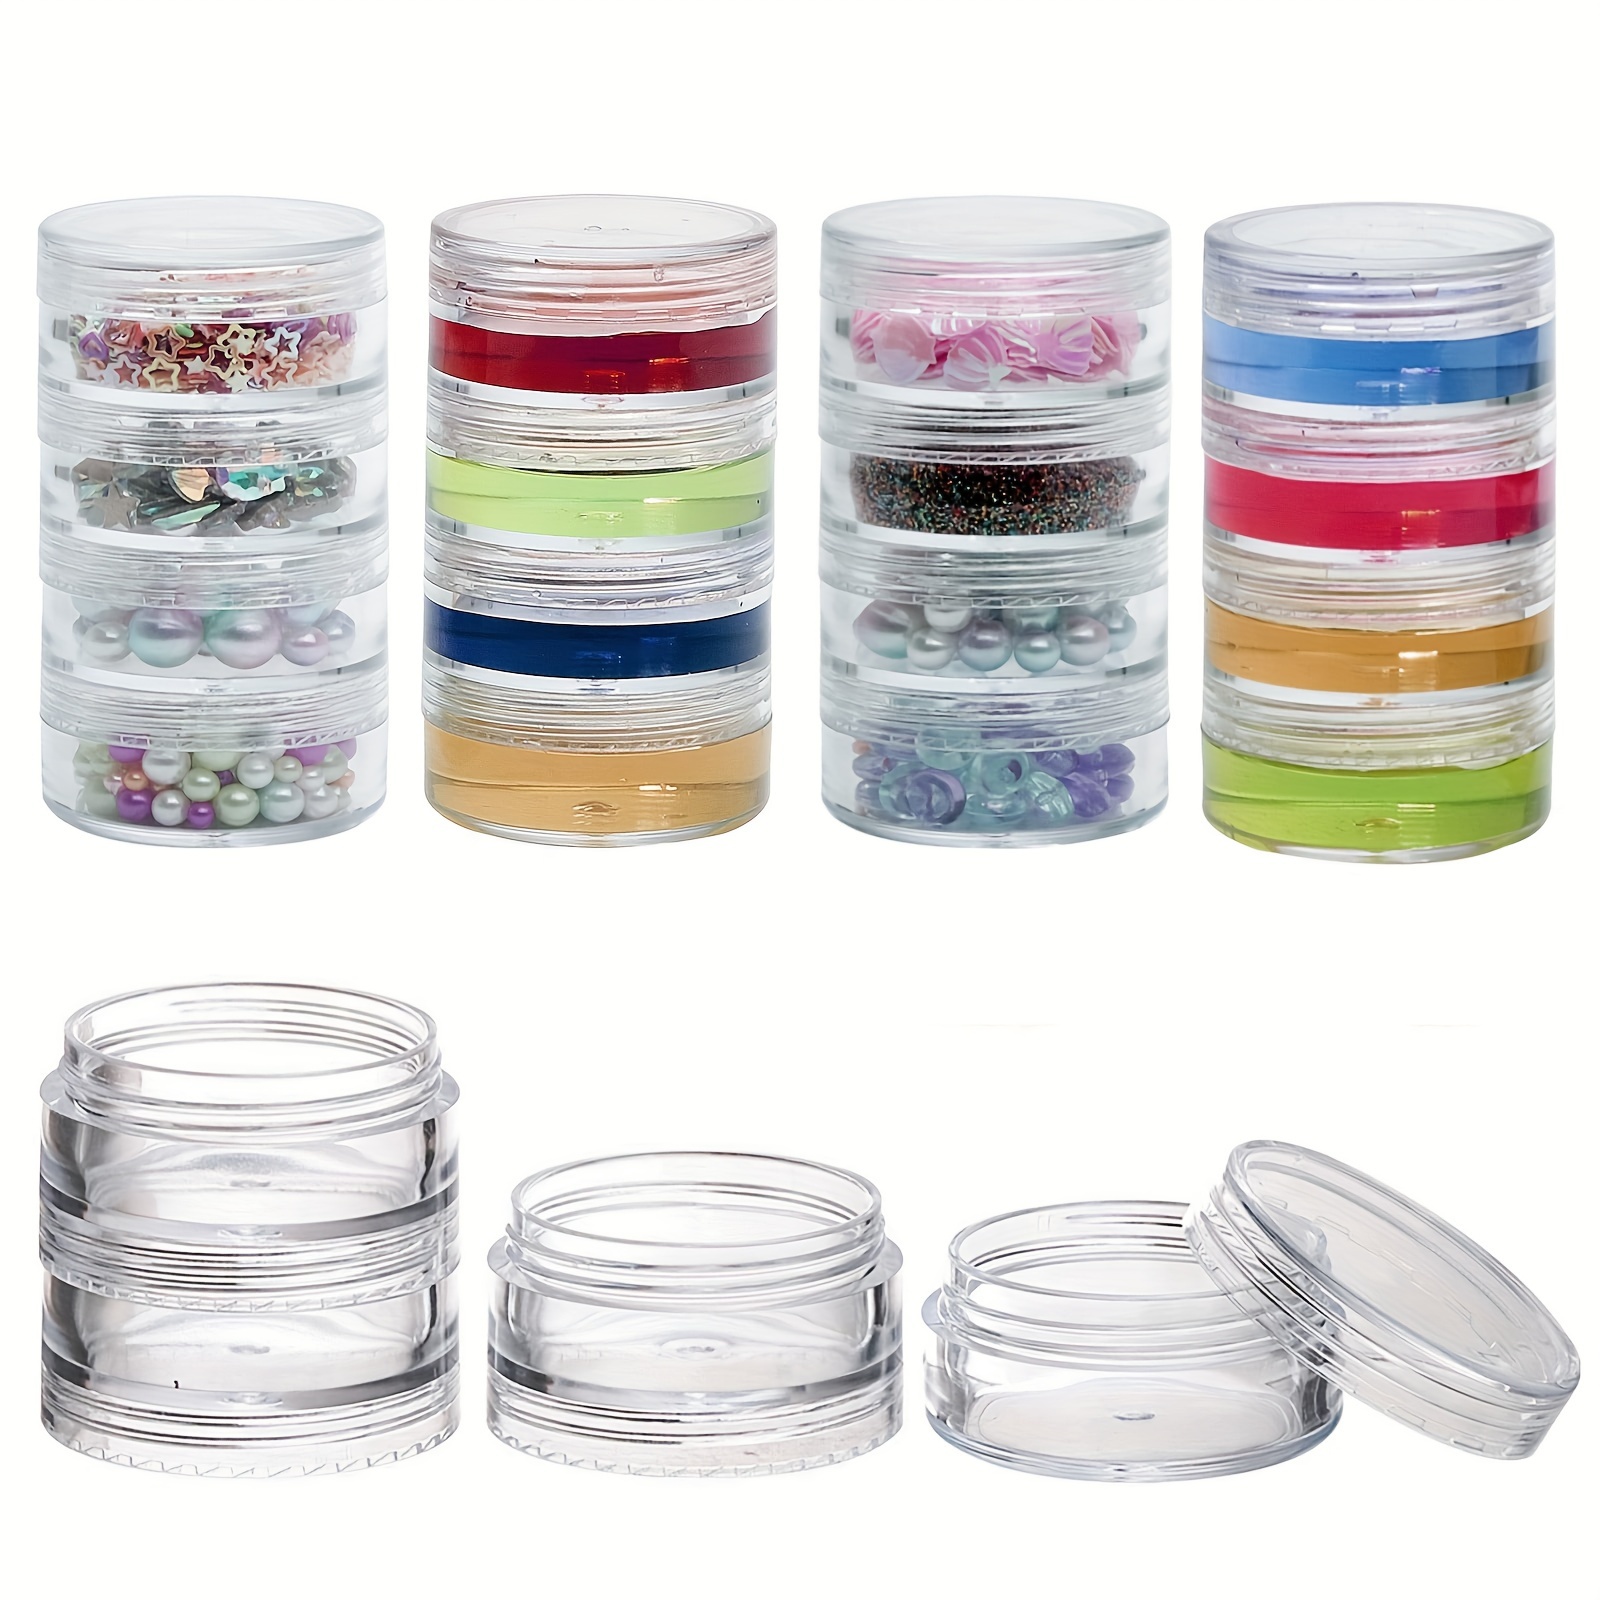 

50 Sets Clear Plastic Round Storage Jars With Lids - Multipurpose Mini Containers For Beads, Jewelry Making, Accessories, No Power Required